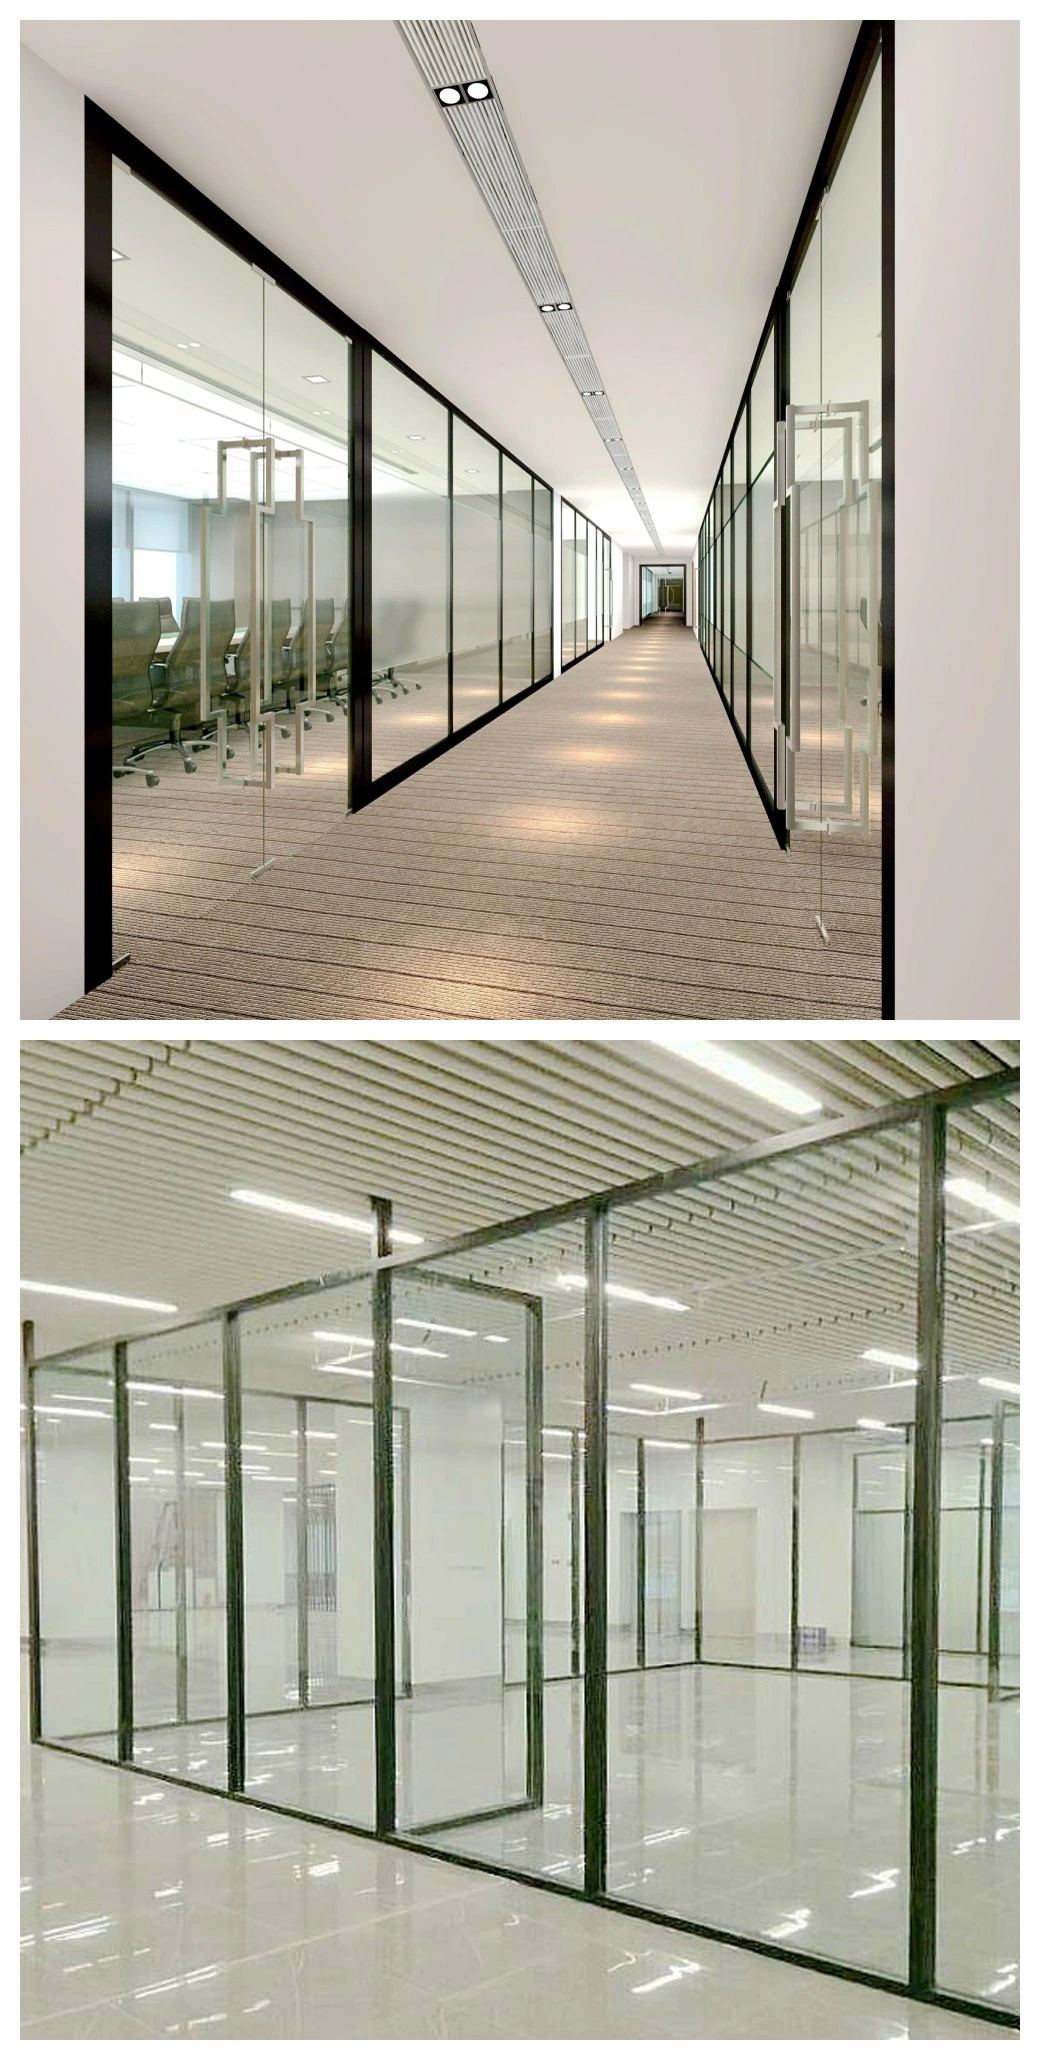 Factory Direct Supplies Glass Window Wall Partition Screen Modular Office Partitions